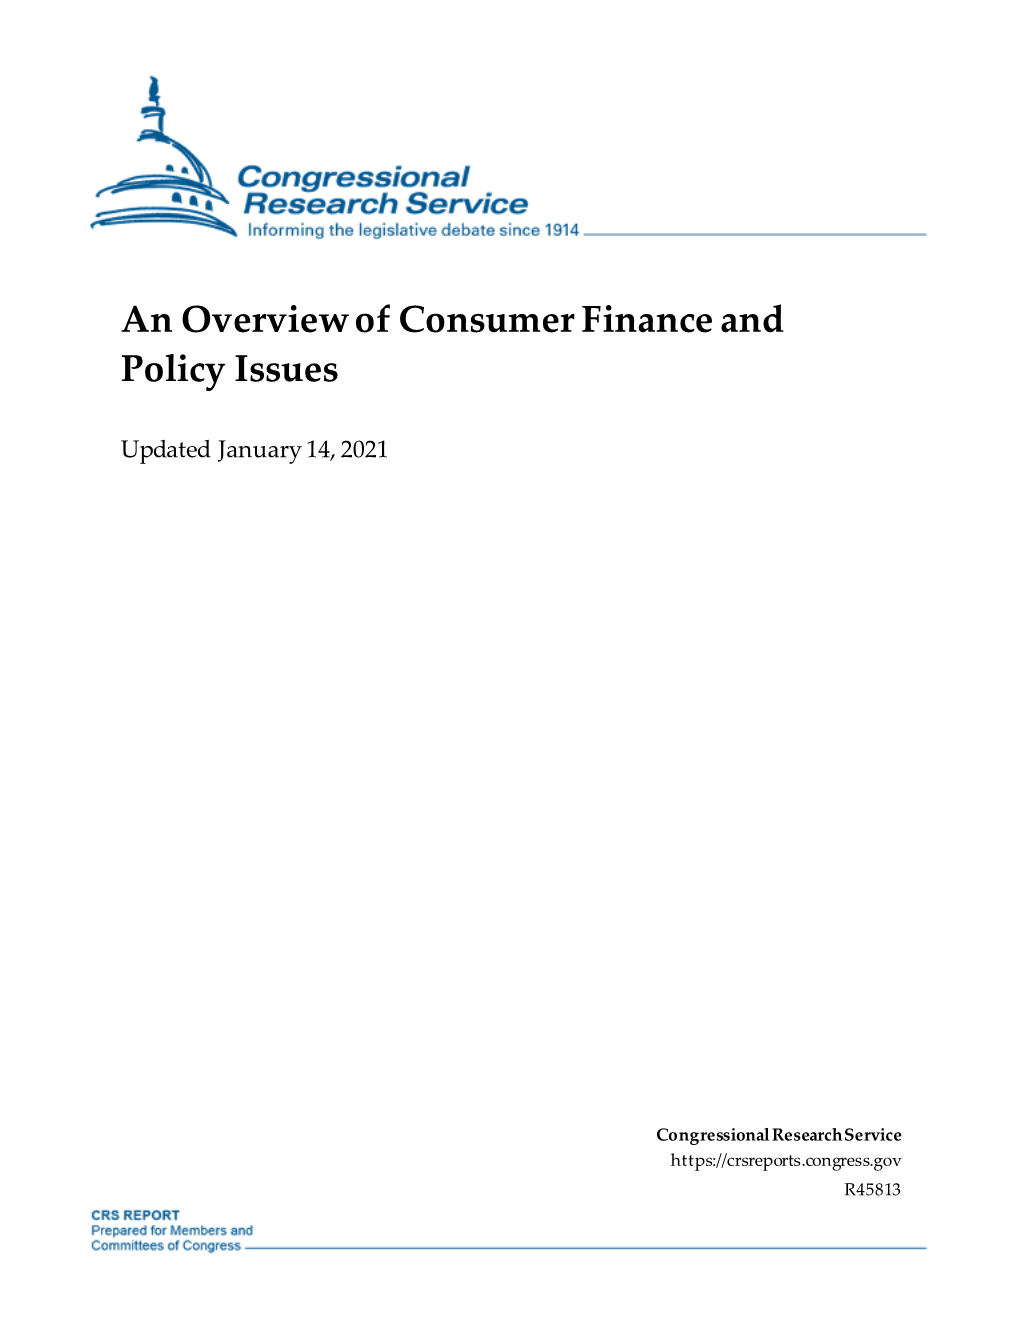 An Overview of Consumer Finance and Policy Issues